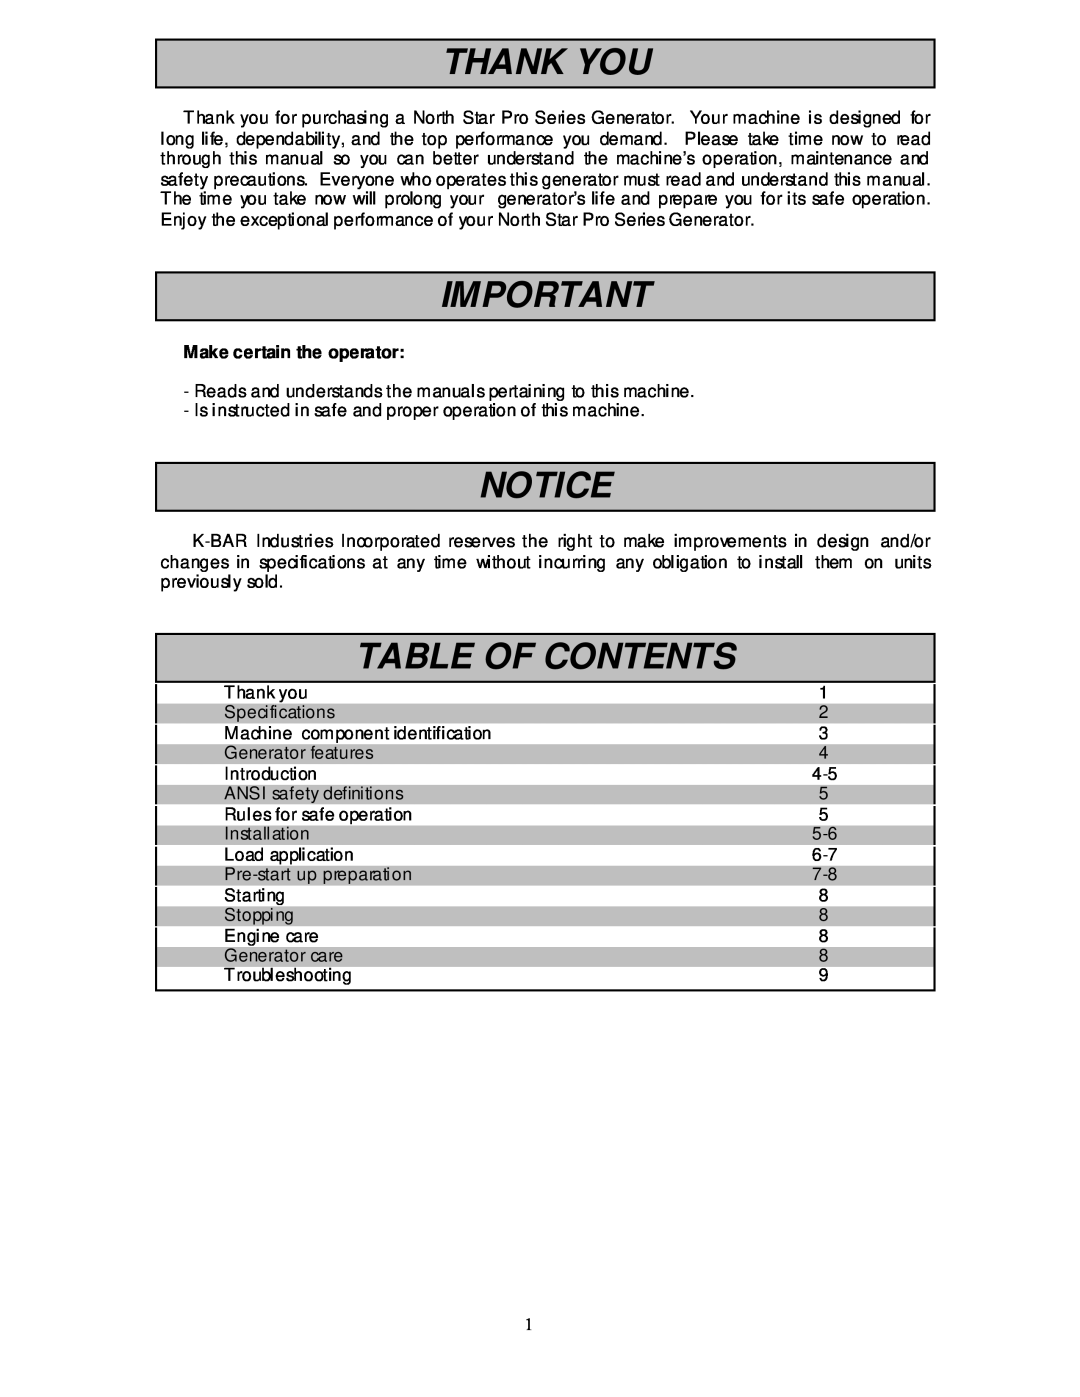 Northern Industrial Tools 15000 PPG owner manual Thank You, Table Of Contents, Make certain the operator 